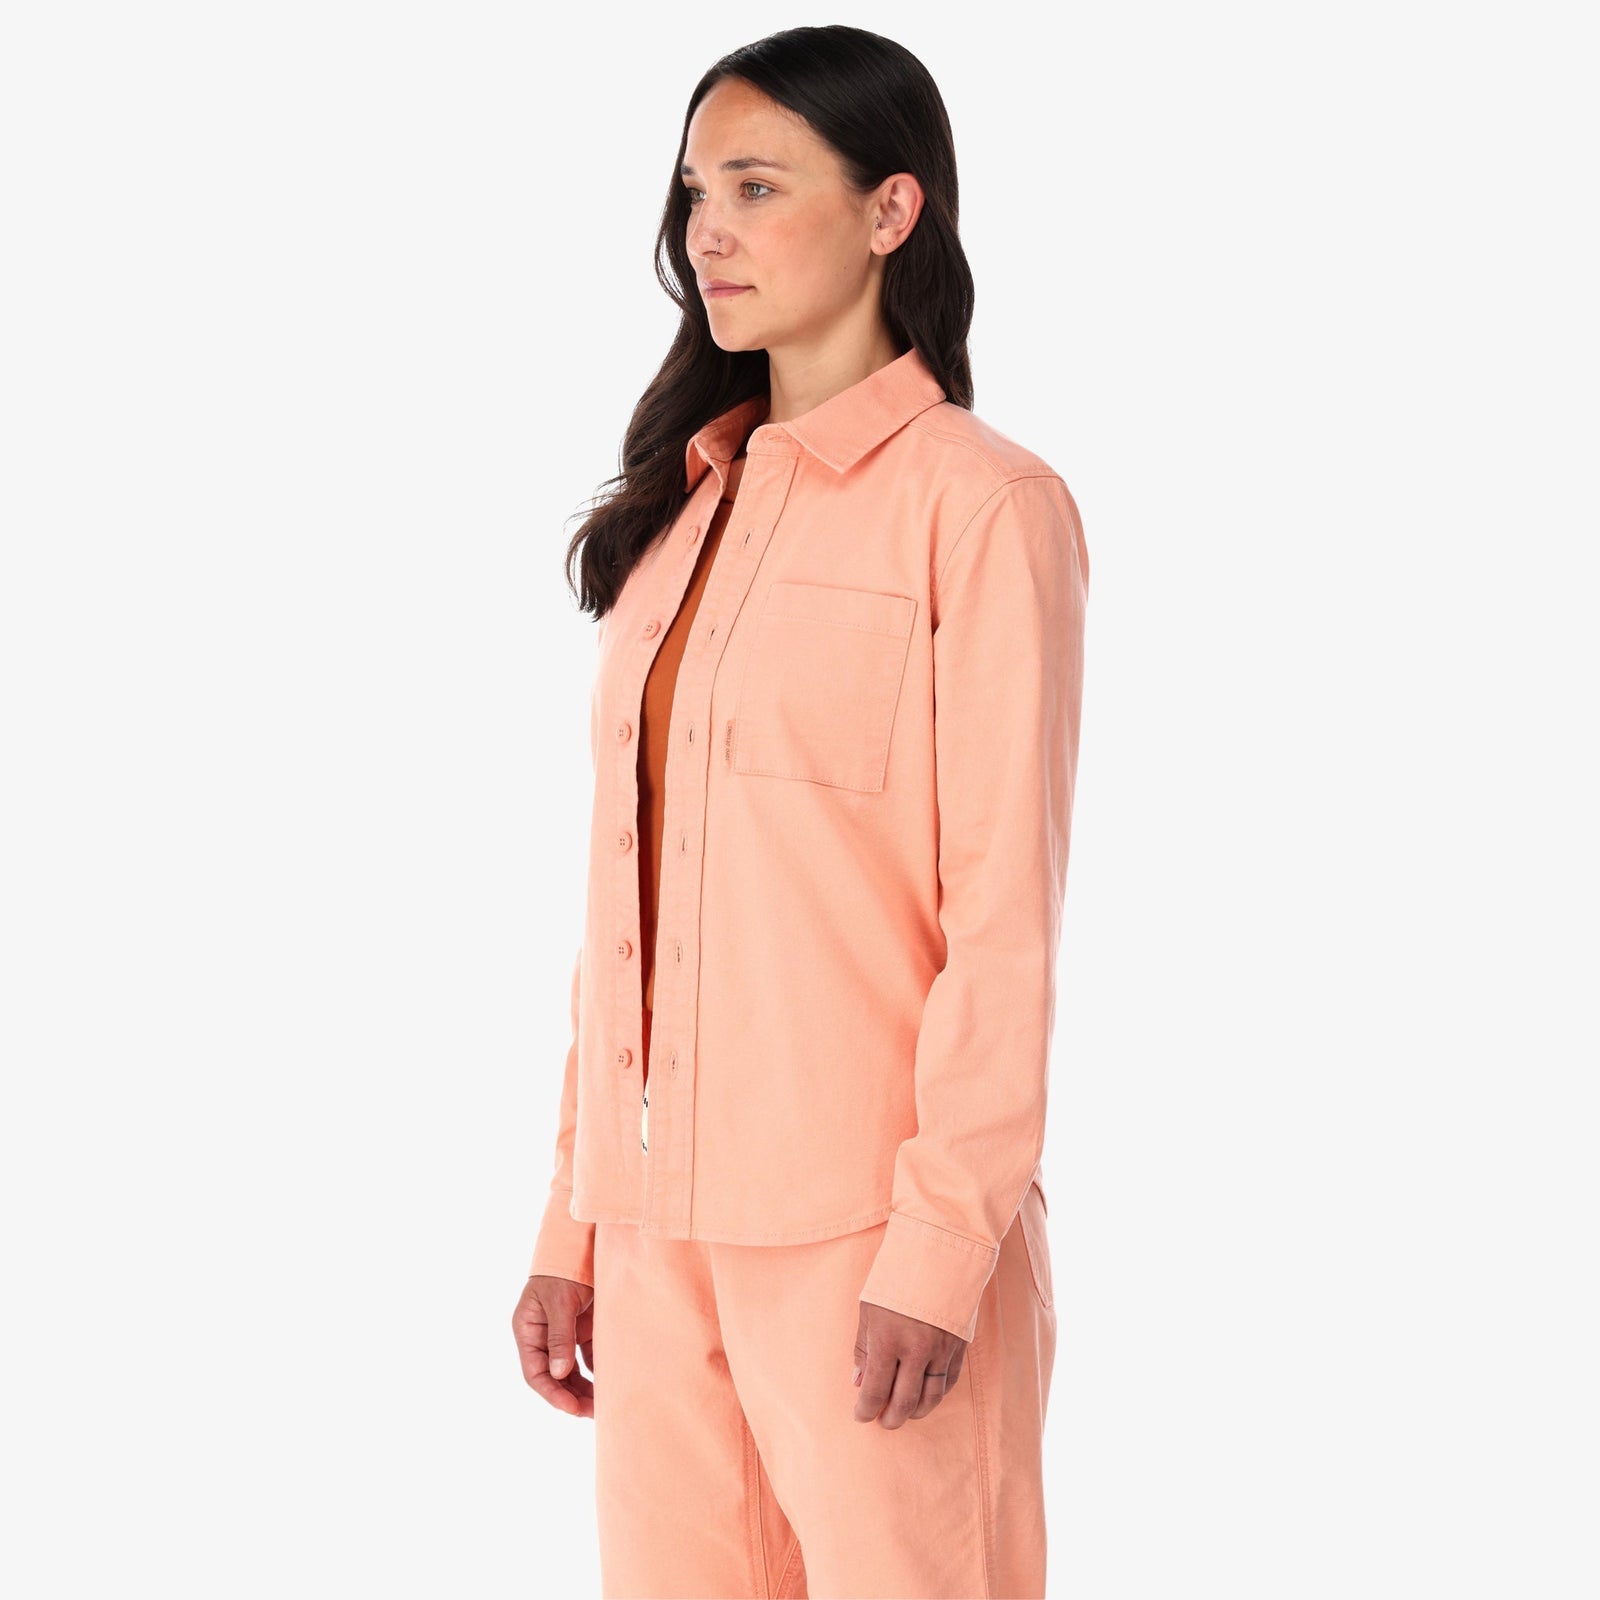 Topo Designs Women's Dirt Shirt long sleeve stretch cotton button-up in "peach" pink on model side.